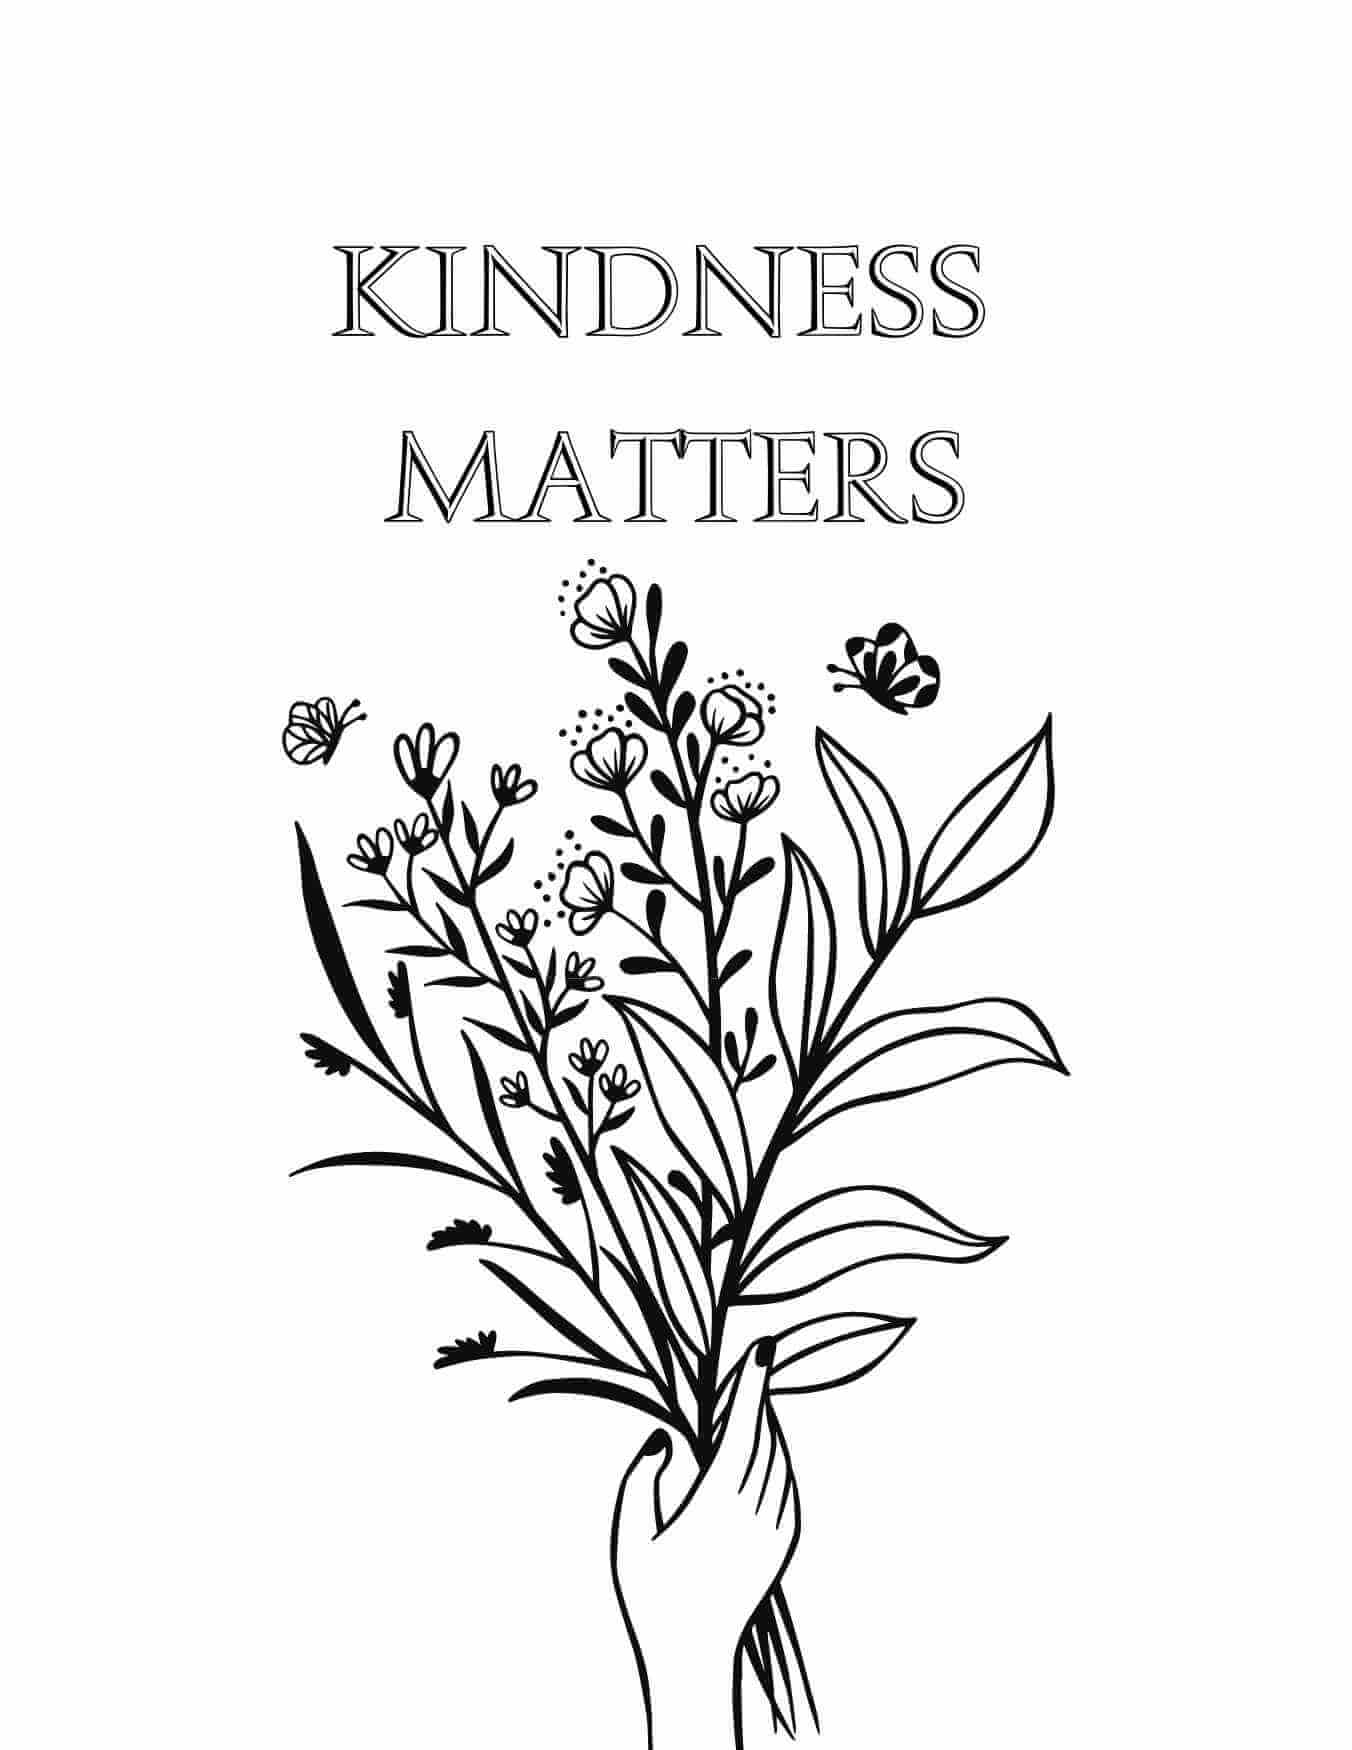 An illustrated hand holding a boquet of flowers with open text that reads "kindness matters" above. 